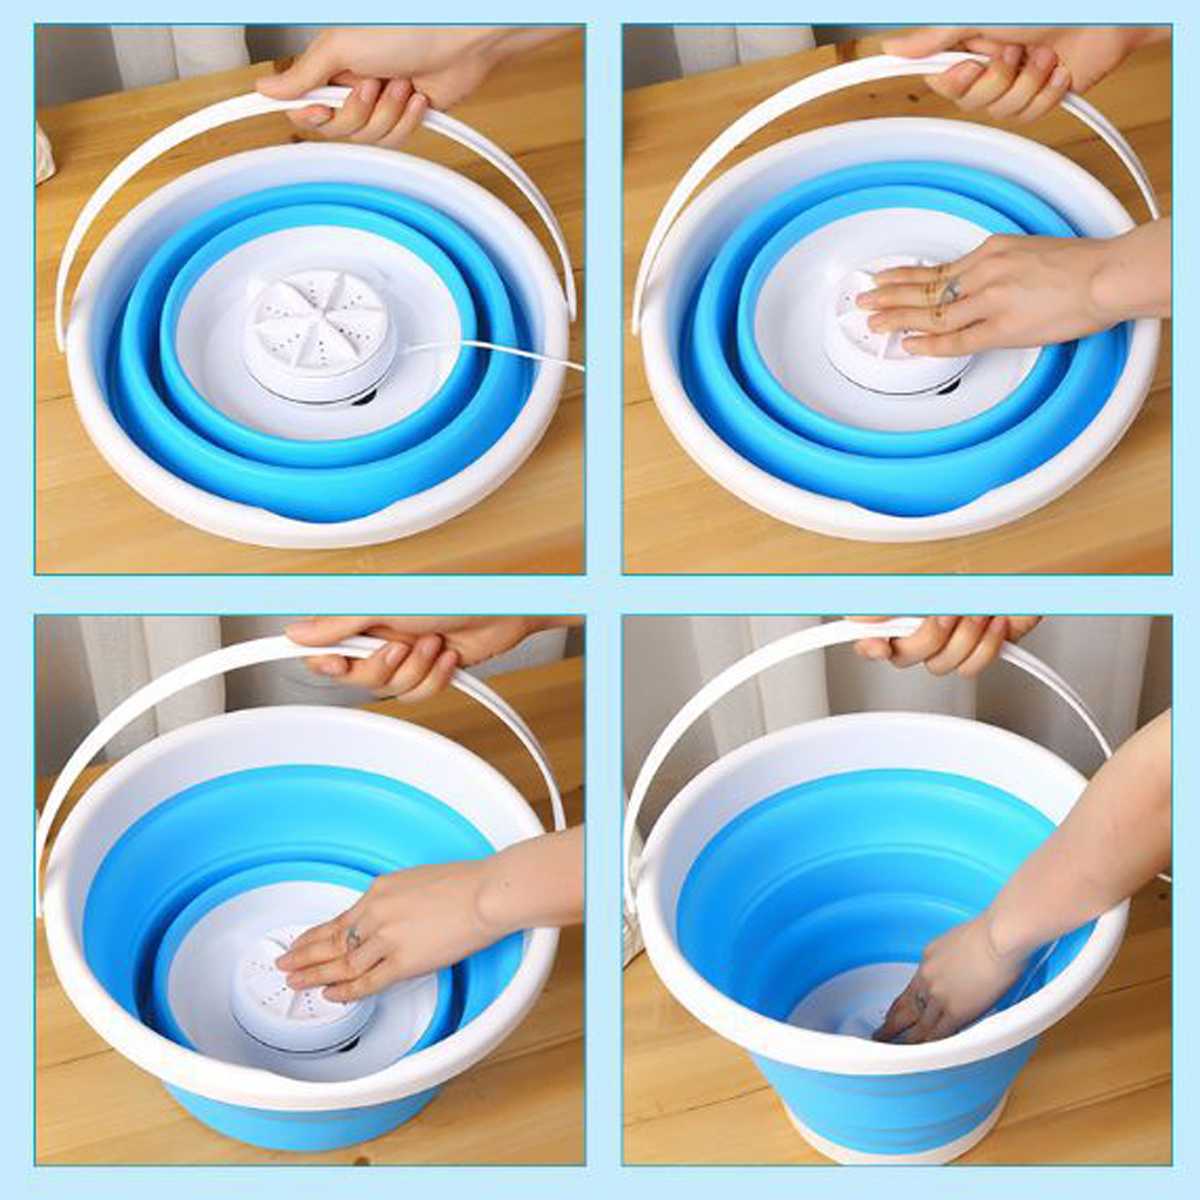 Foldable Mini Washing Ultrasonic Turbines Washer Household Rotating USB Charging Laundry Clothes Cleaner Tool For Home Travel 5L